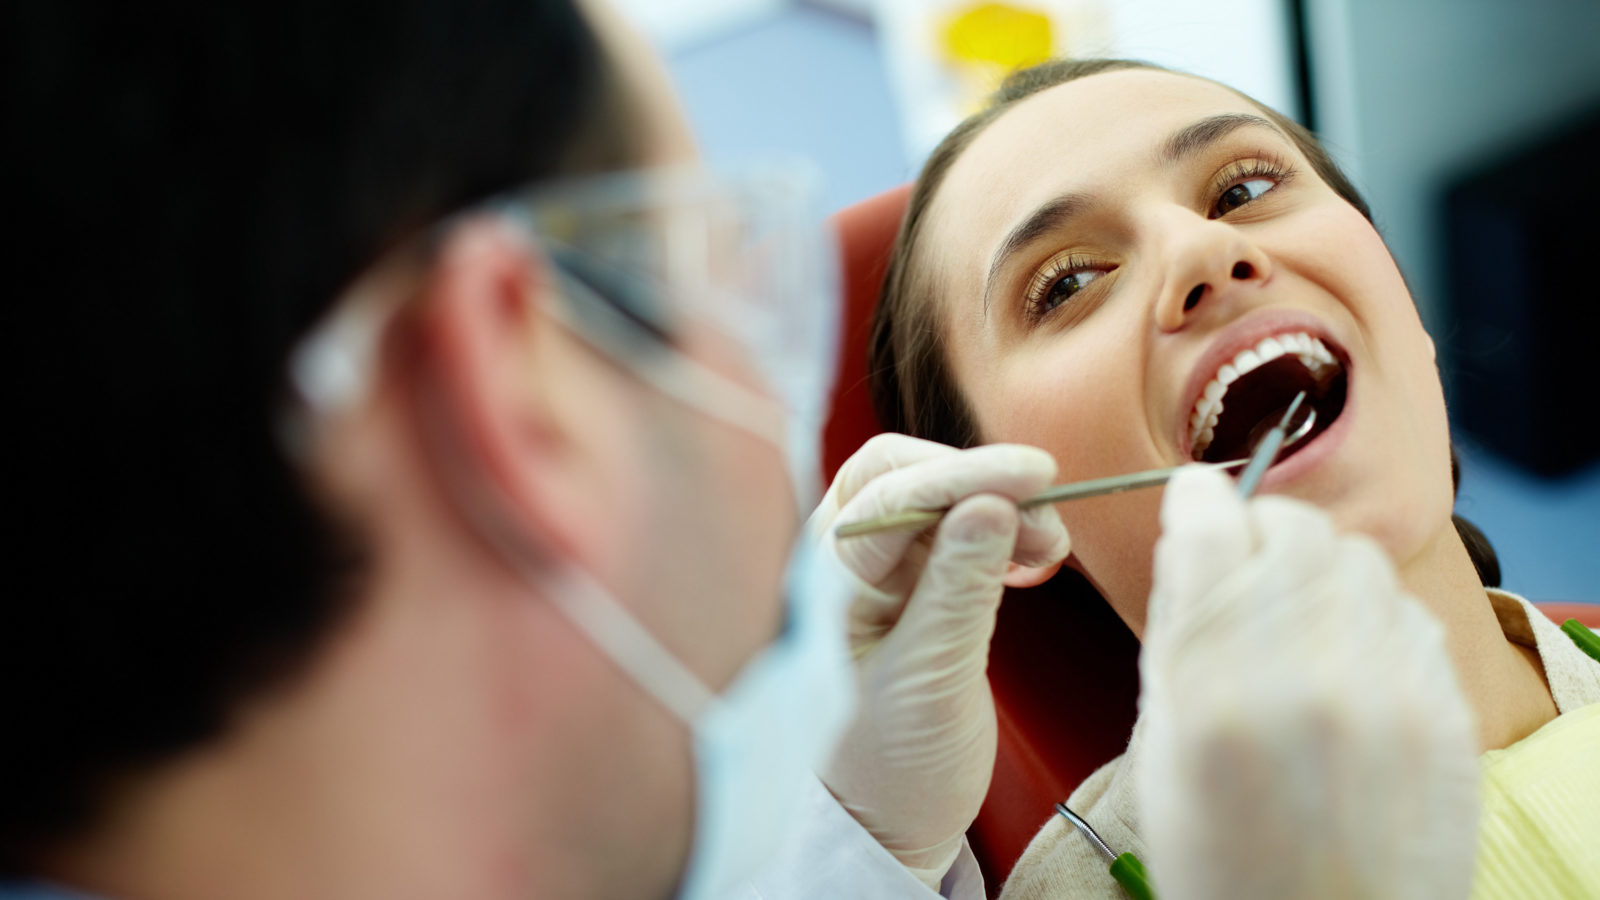 Top 10 Best Dentists Tampa